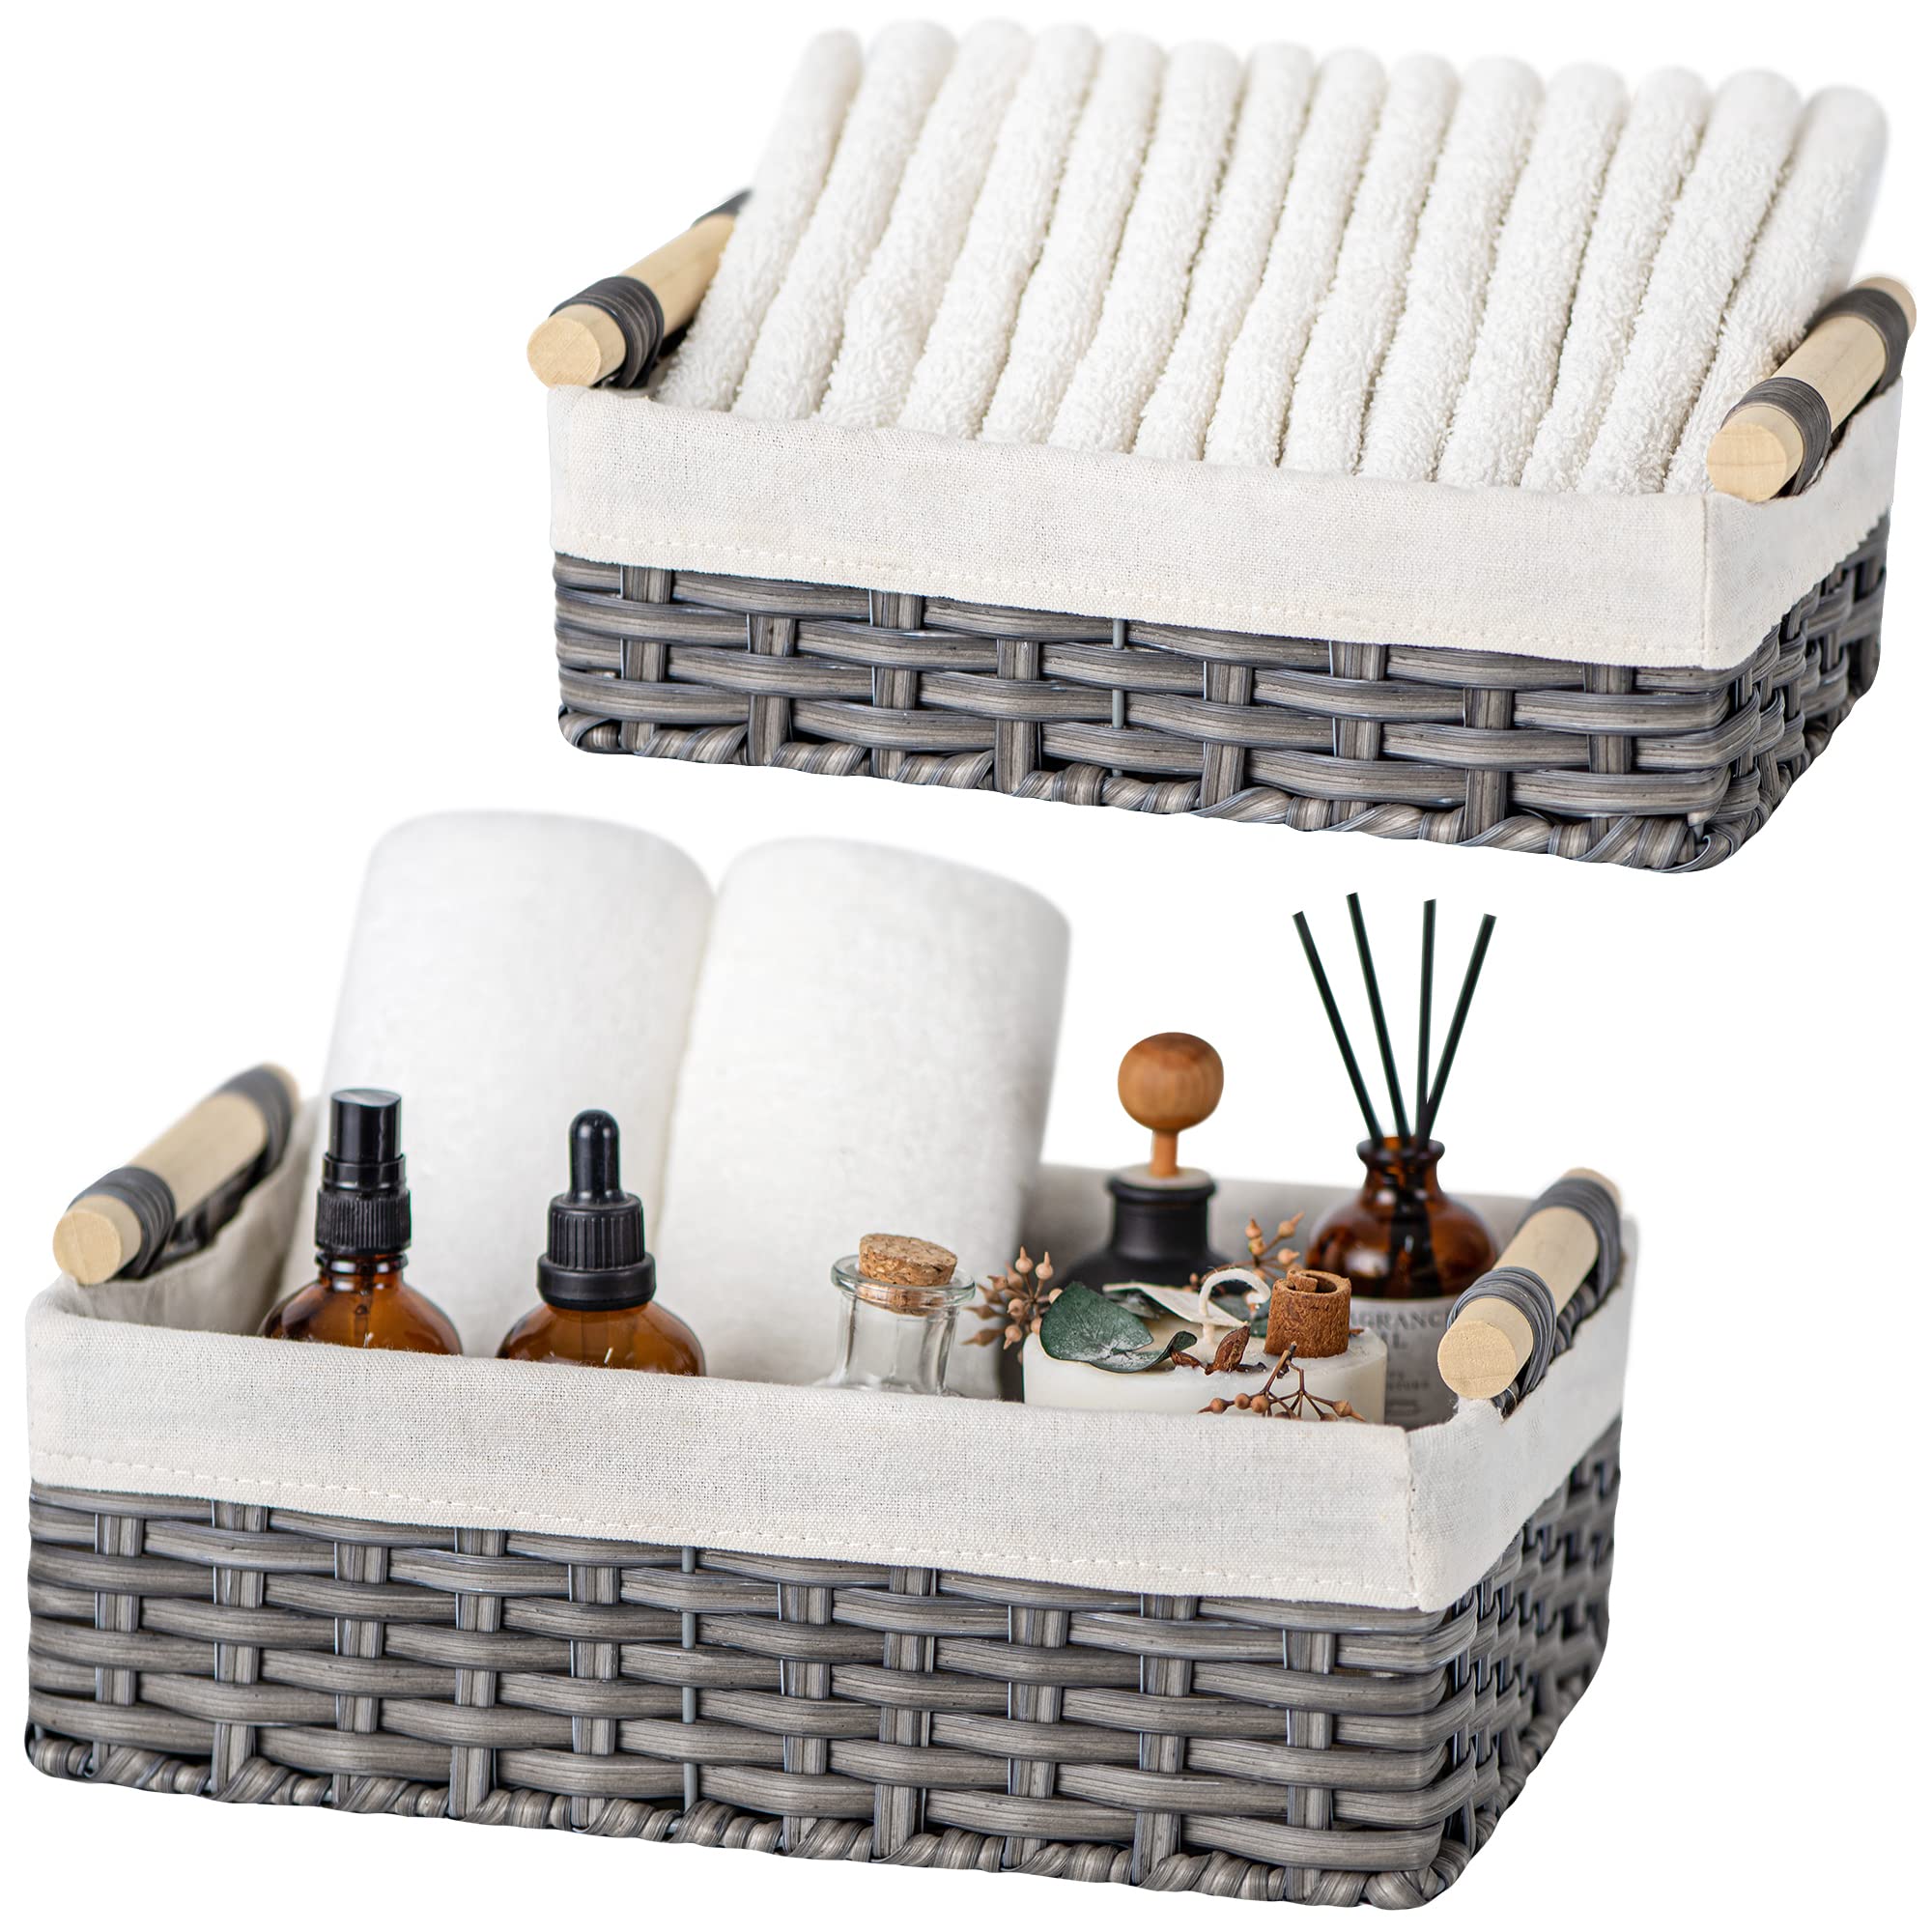 GRANNY SAYS Gray Wicker Baskets, Decorative Baskets for Shelves, Basket Organizer with Handles, Small Wicker Baskets for Organizing, Toilet Paper Baskets for Organizing, Set of 2